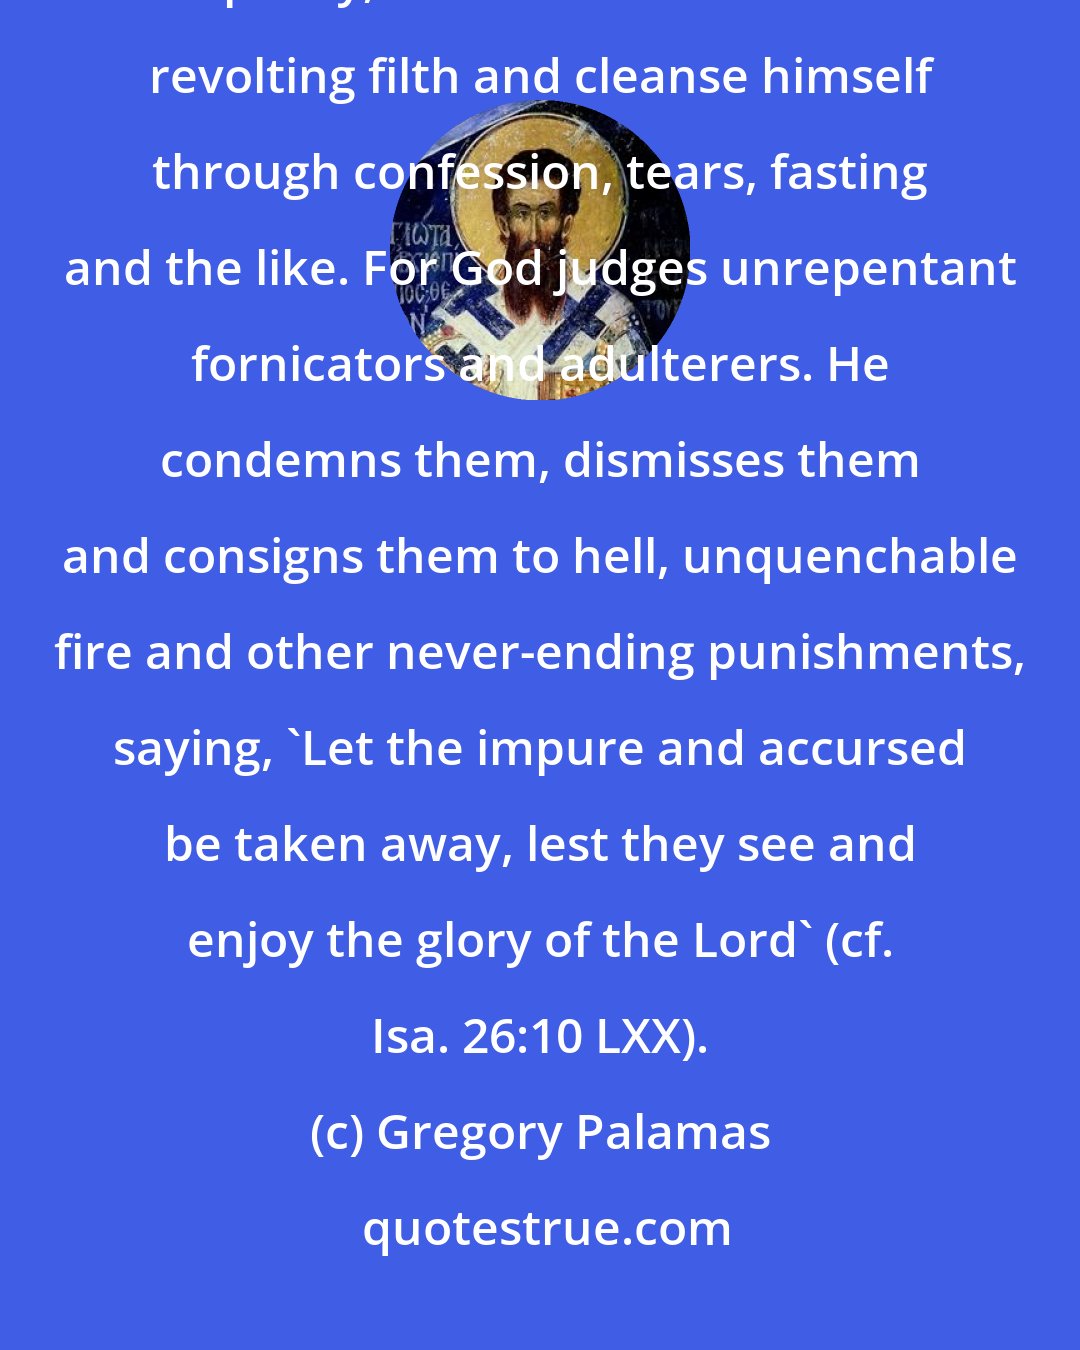 Gregory Palamas: Anyone who has fallen into fornication, adultery or any other such bodily impurity, should desist from this revolting filth and cleanse himself through confession, tears, fasting and the like. For God judges unrepentant fornicators and adulterers. He condemns them, dismisses them and consigns them to hell, unquenchable fire and other never-ending punishments, saying, 'Let the impure and accursed be taken away, lest they see and enjoy the glory of the Lord' (cf. Isa. 26:10 LXX).